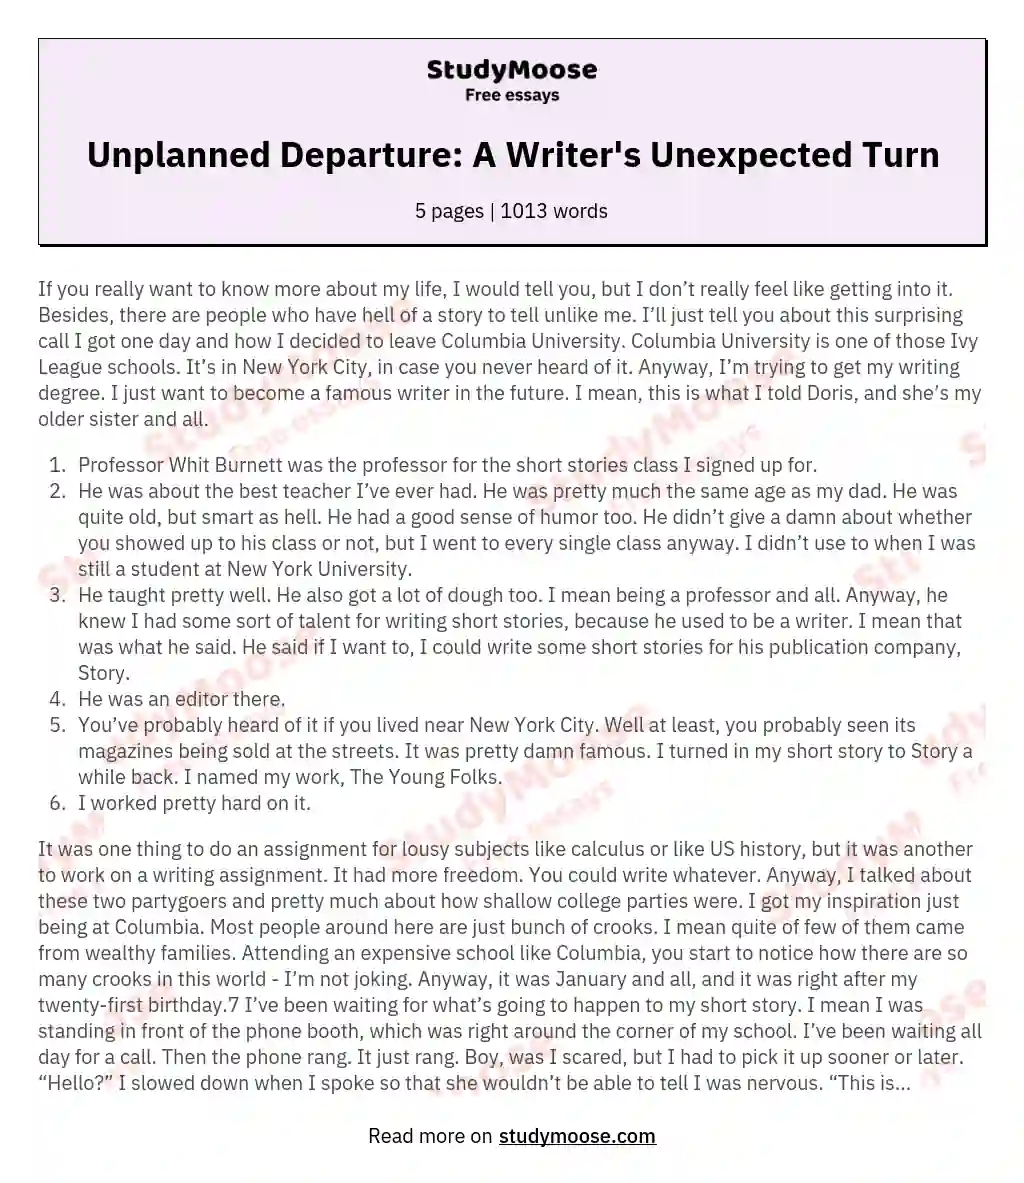 Unplanned Departure: A Writer's Unexpected Turn essay